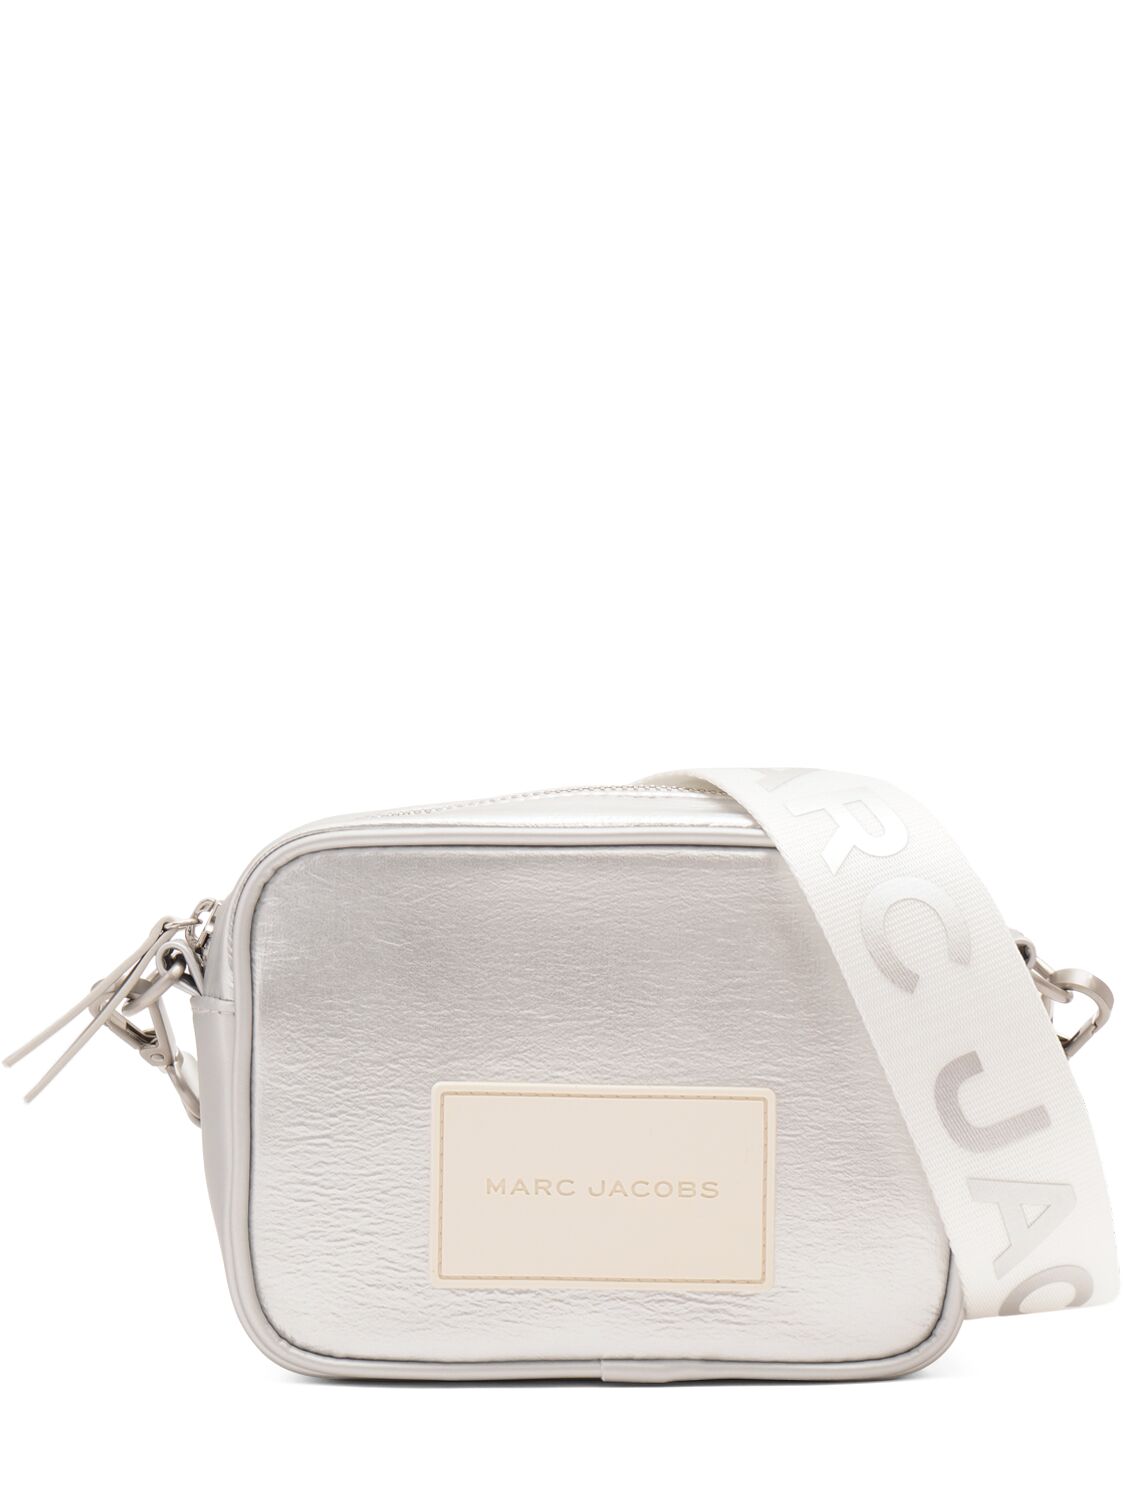 Marc Jacobs Kids' Logo斜挎包 In Silver